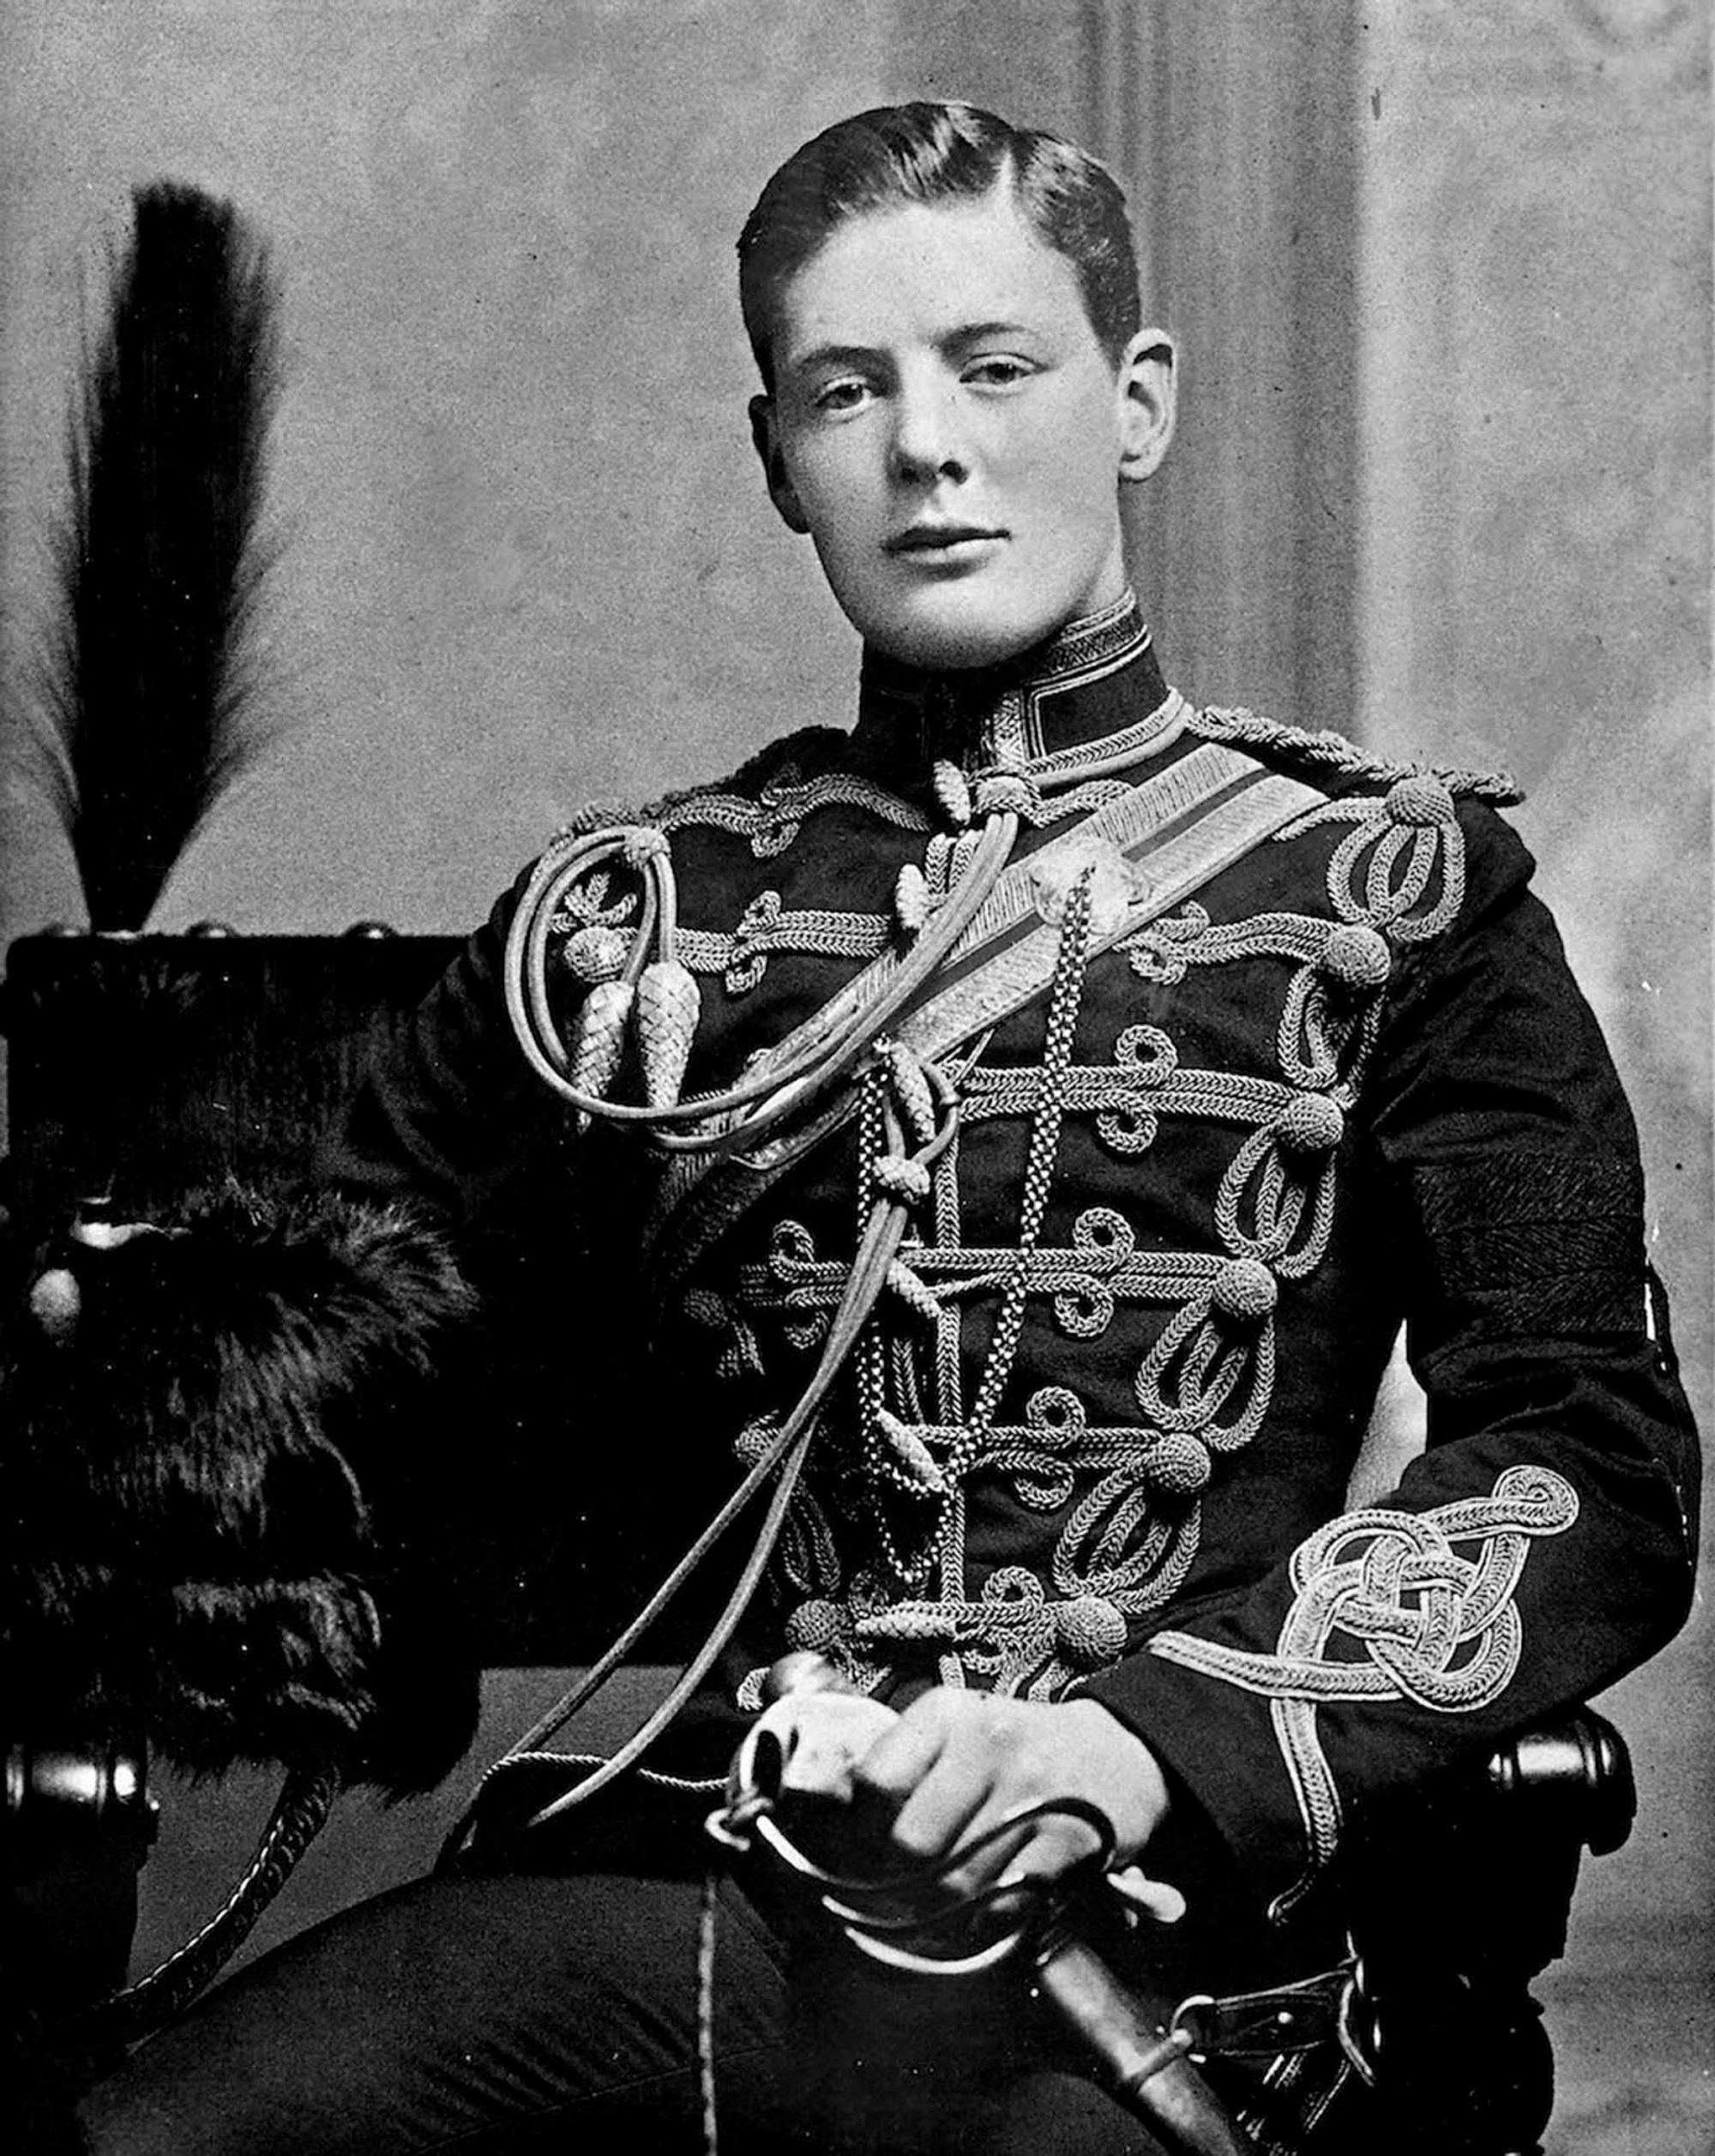 Faith in My Star: Winston Churchill’s Belief in His Own Greatness and Destiny, 1874-1900